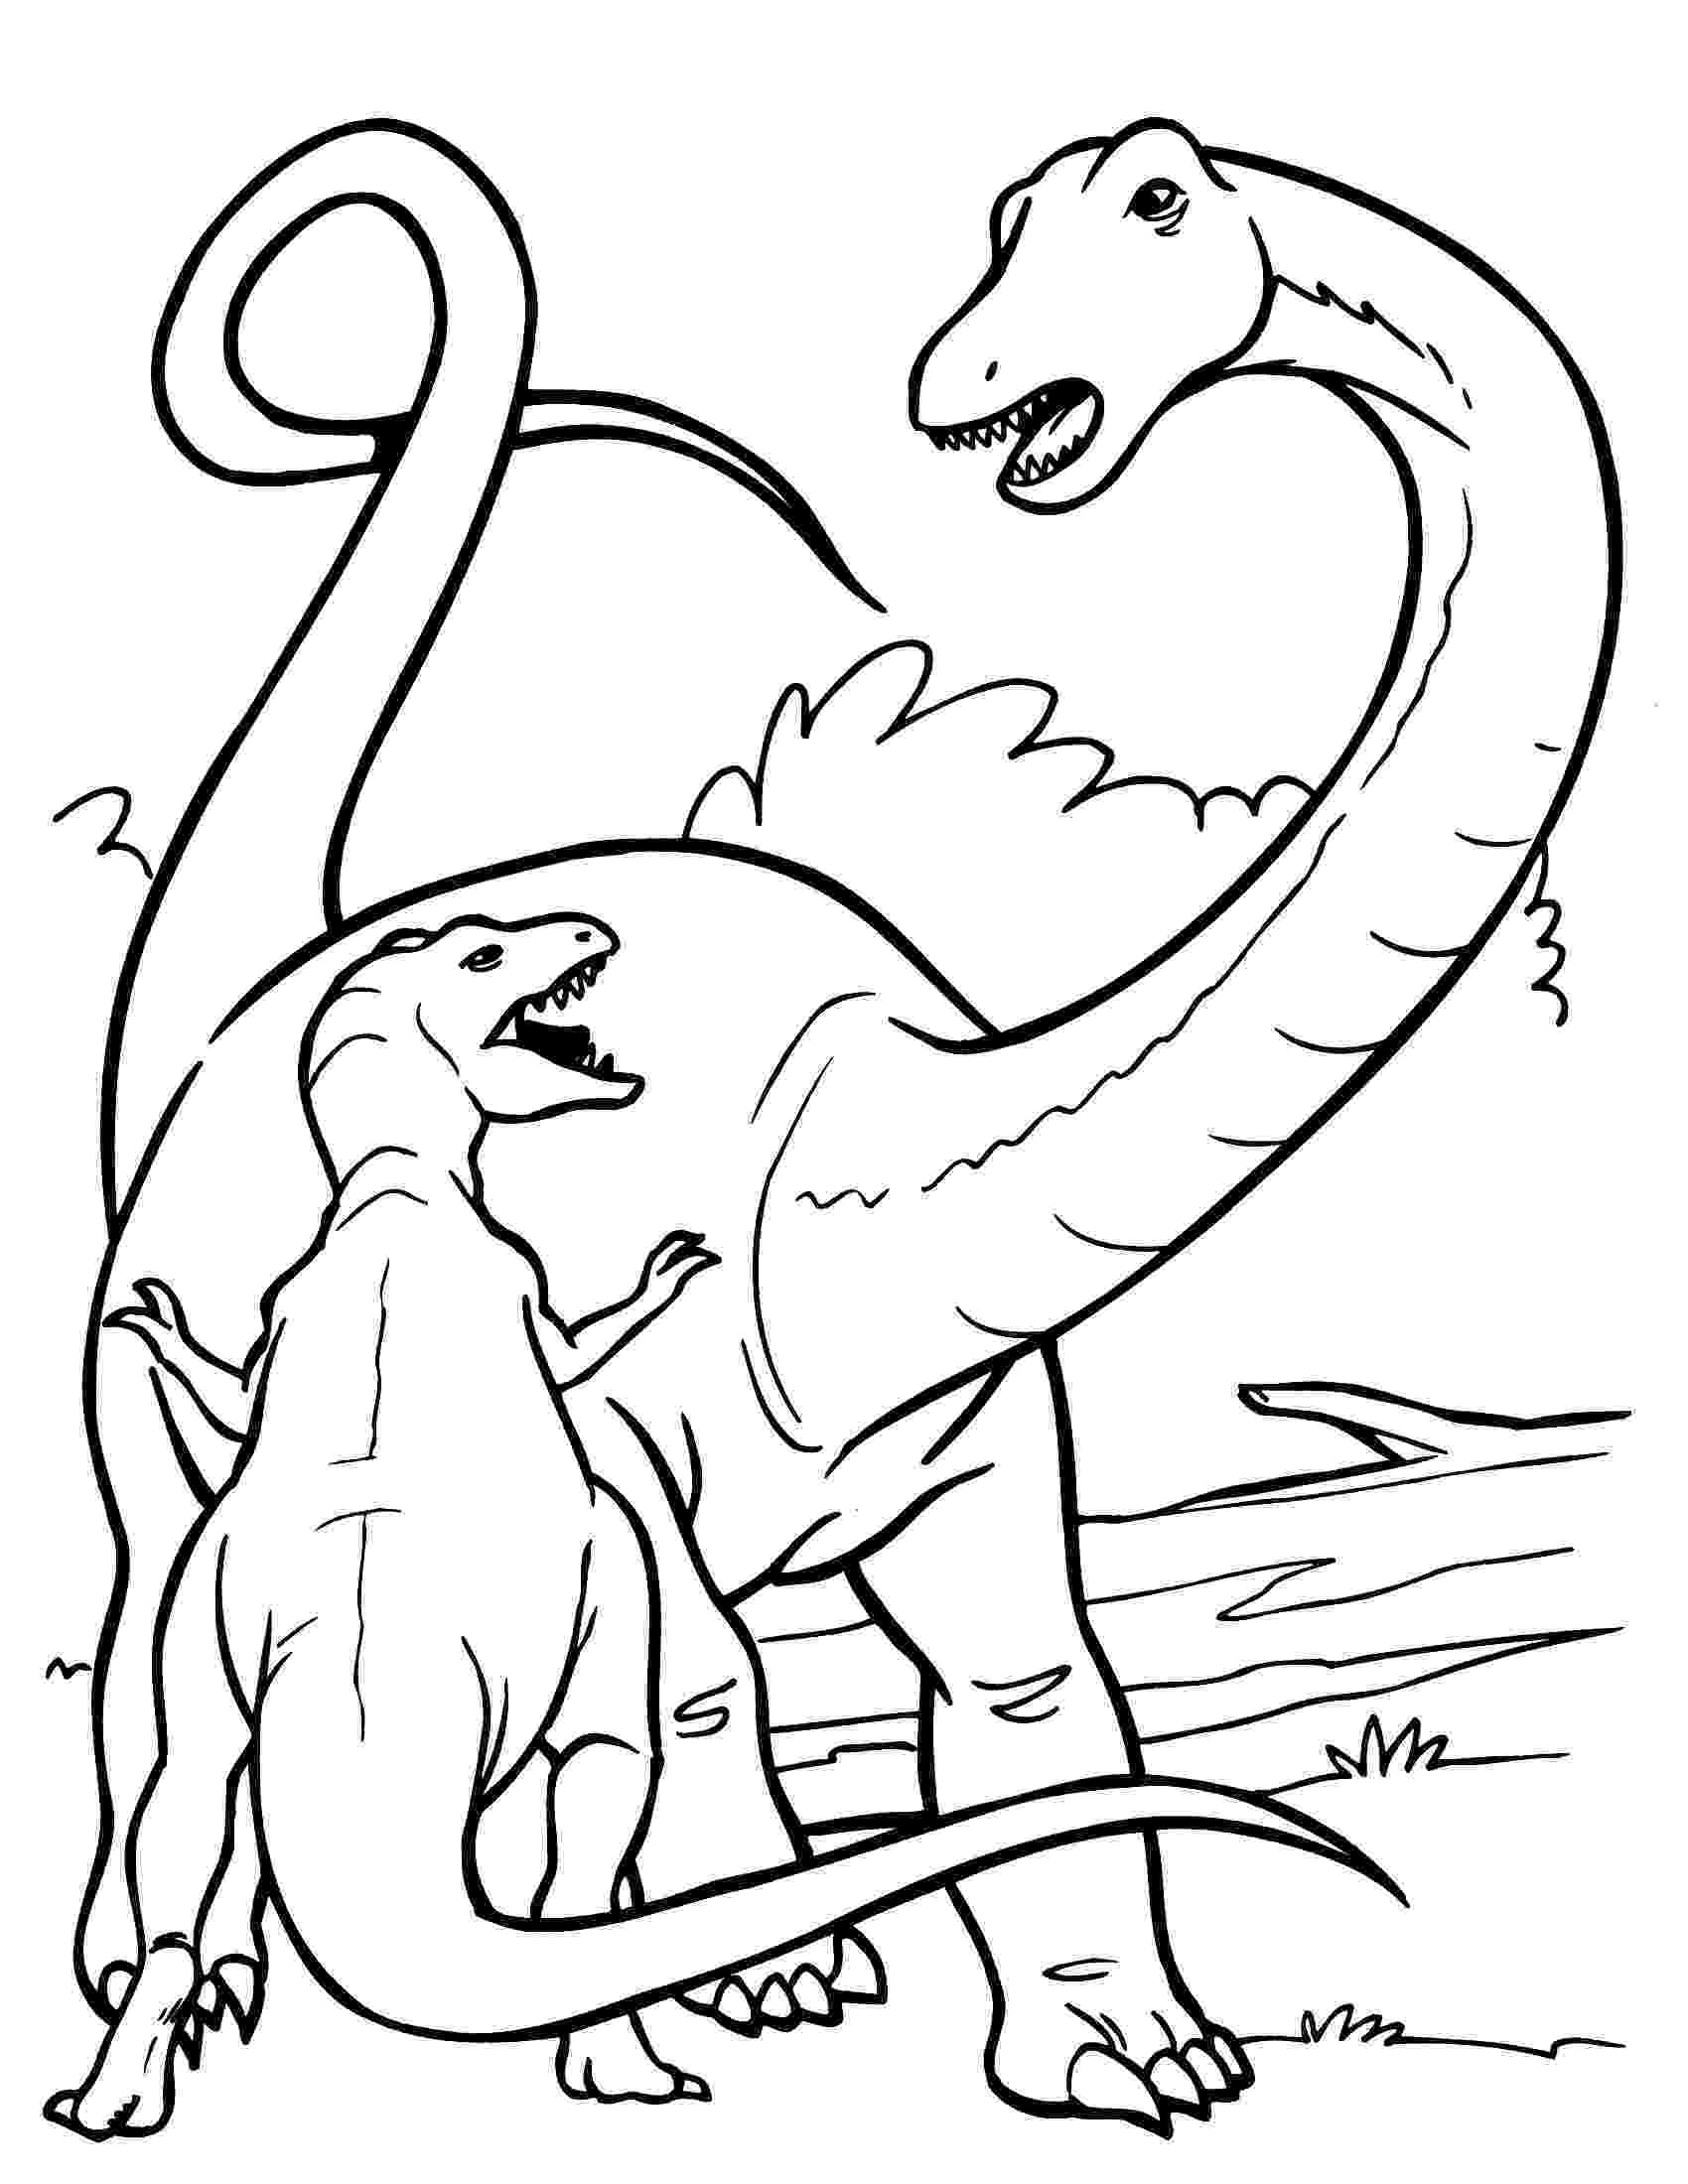 dinosaur color page the good dinosaur coloring pages disneyclipscom page dinosaur color 